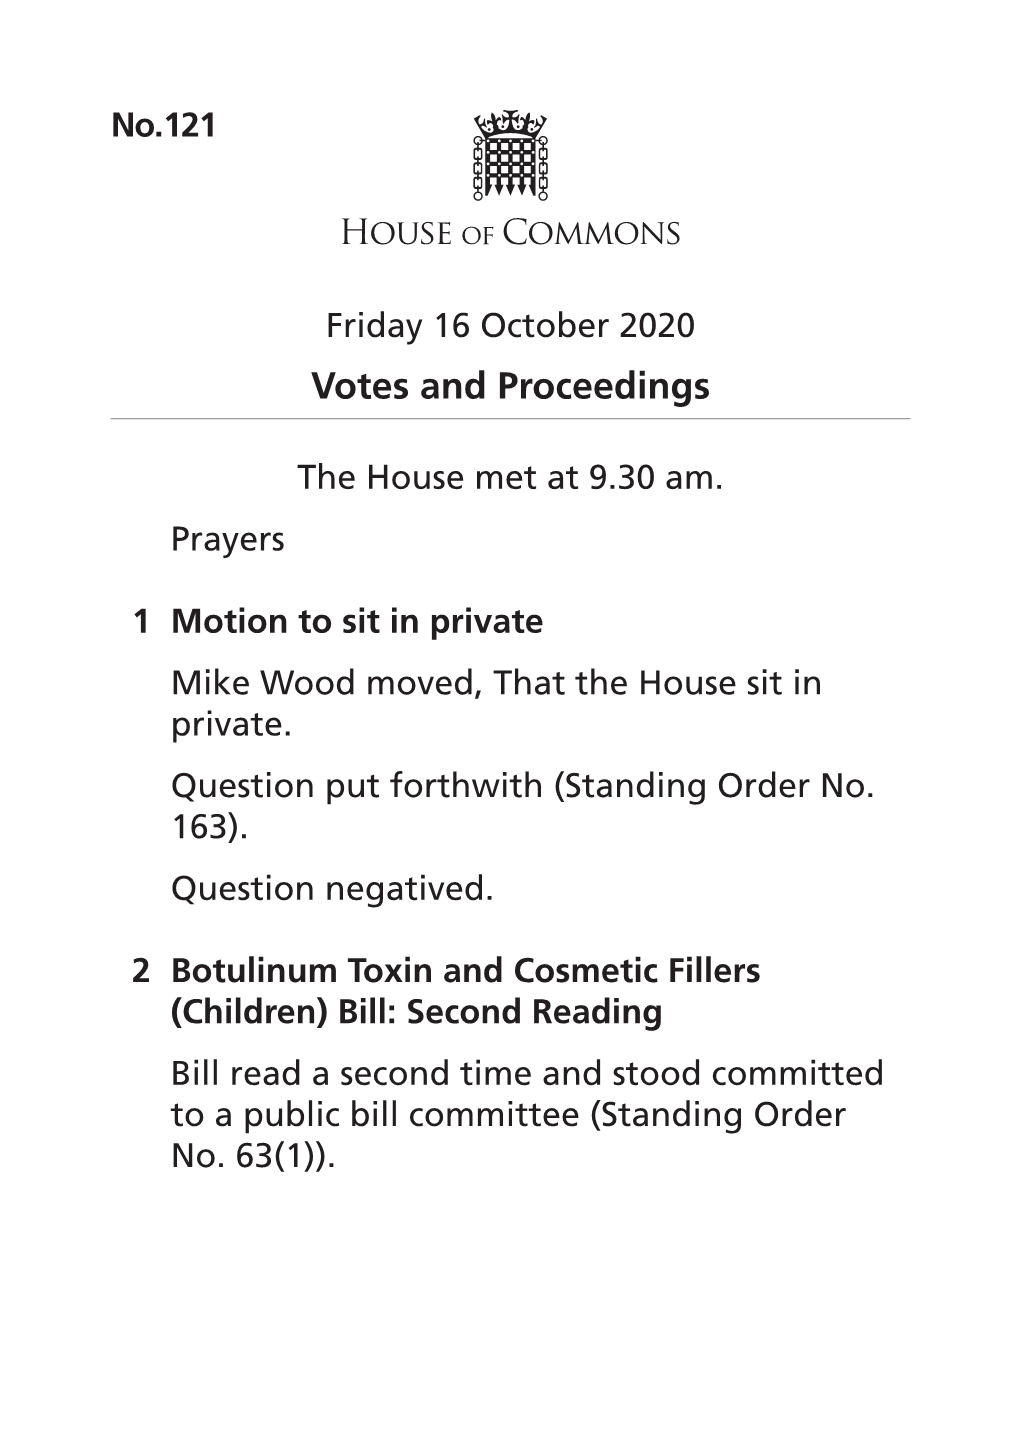 View Votes and Proceedings (Large Print) PDF File 0.03 MB